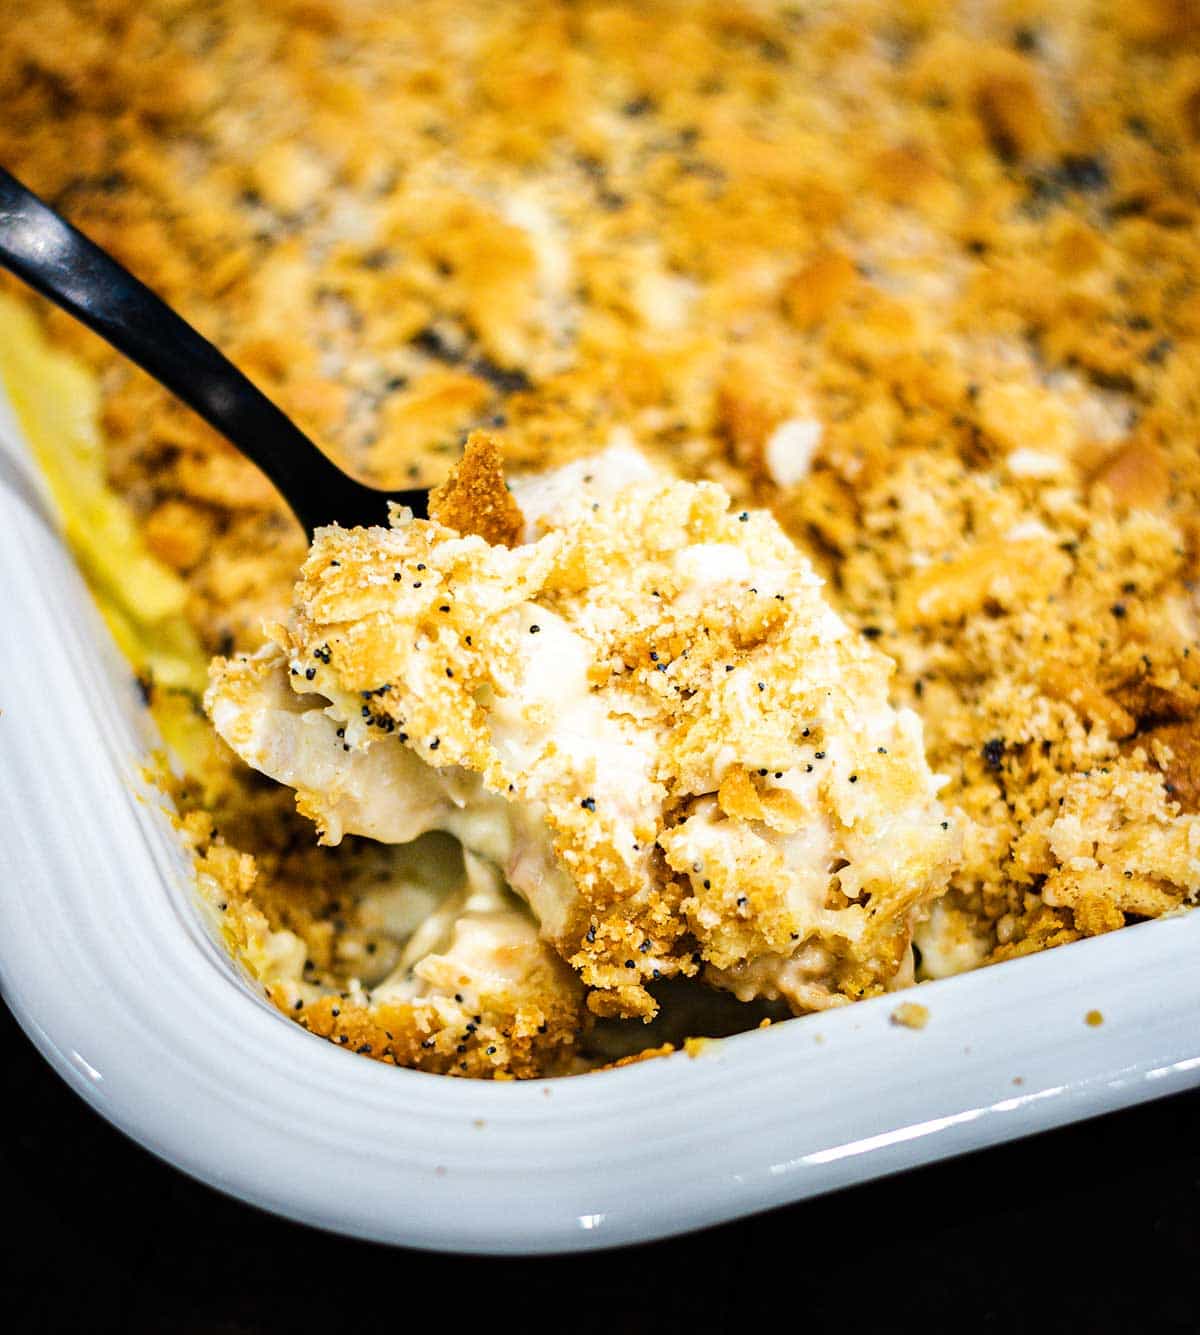 Creamy Chicken Poppy Seed Casserole being scooped and served with a black serving spoon.